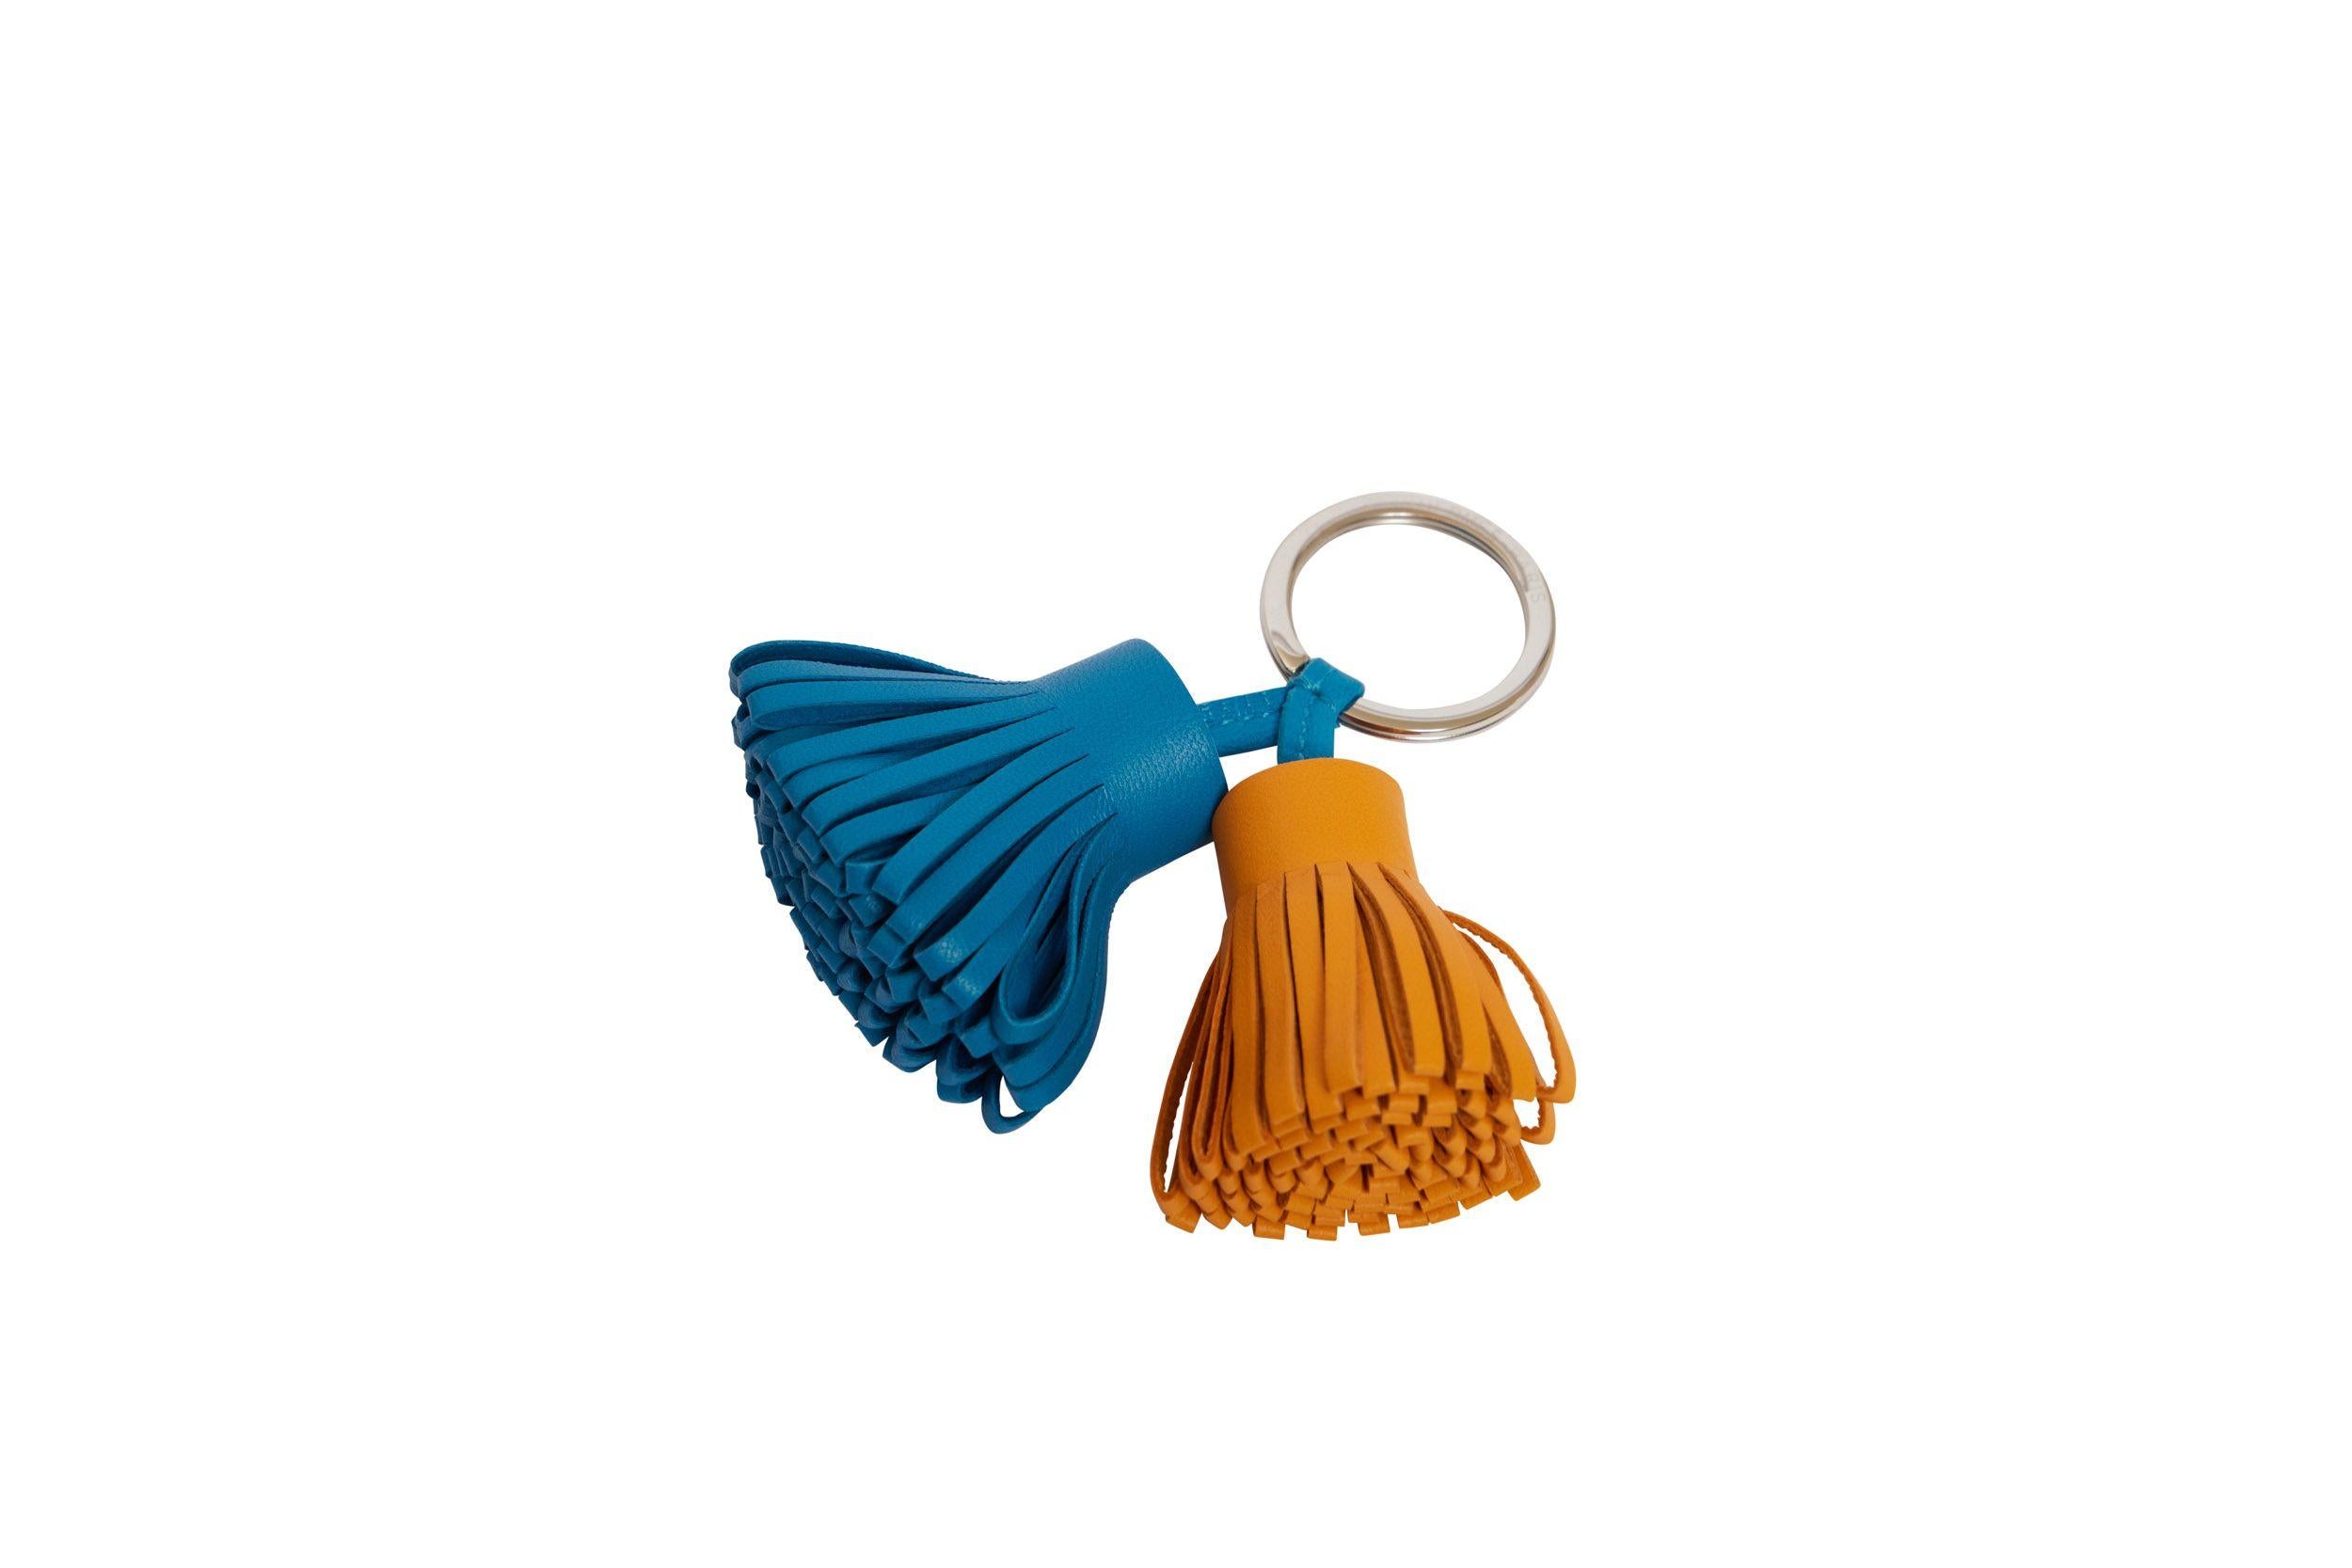 HERMES curry and blue leather double Carmen tassel keychain. Palladium metal Brand new with original box, ribbon, and shopping bag.